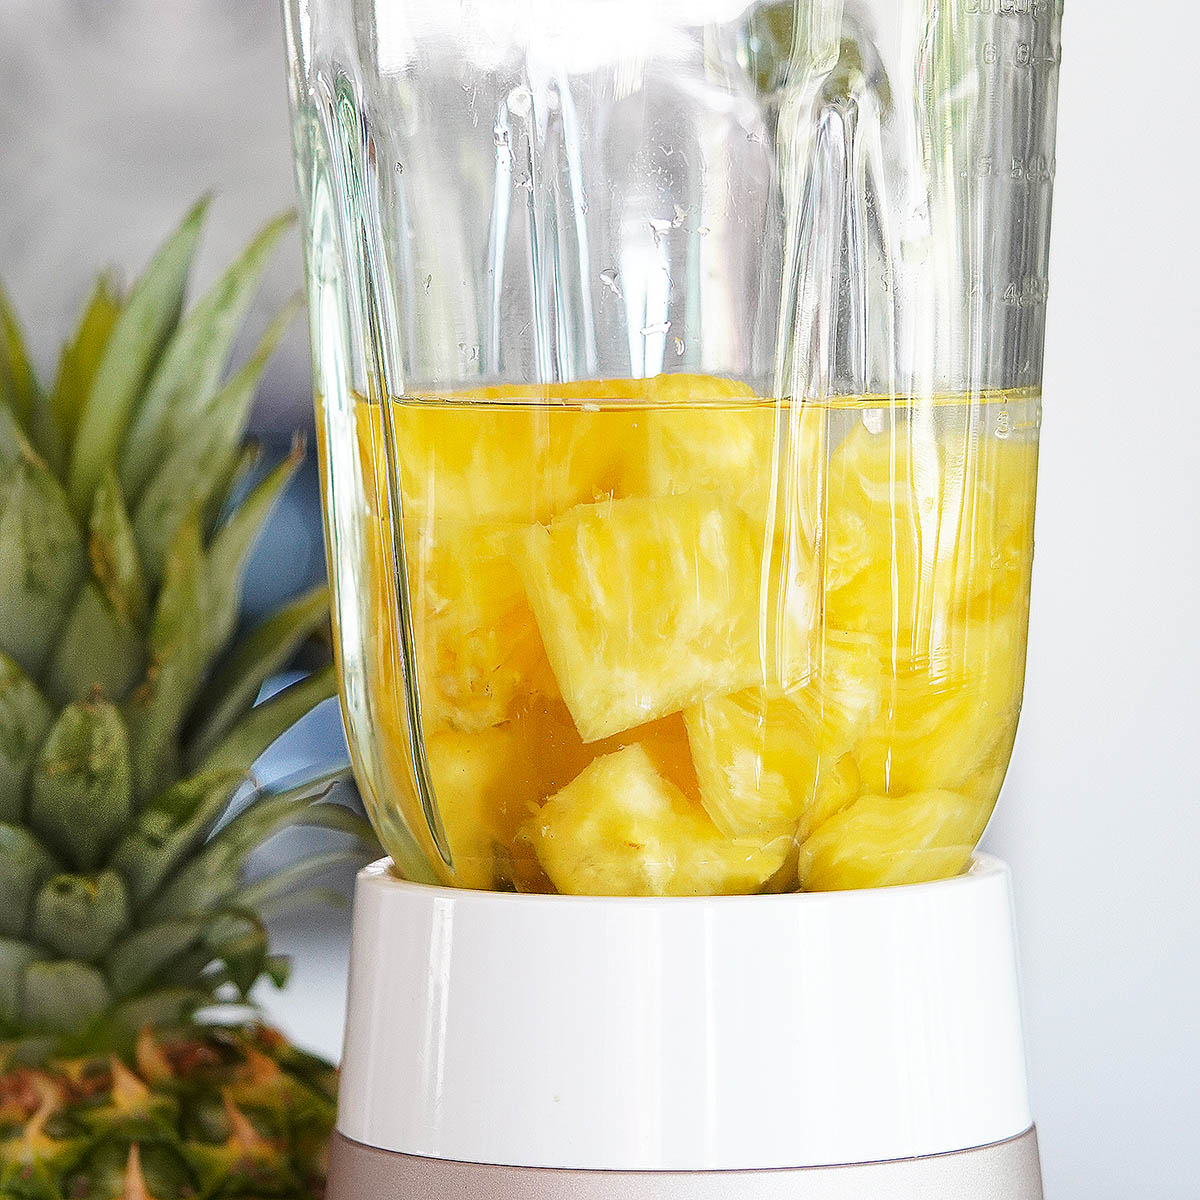 Pineapple chunks in a blender with some water.